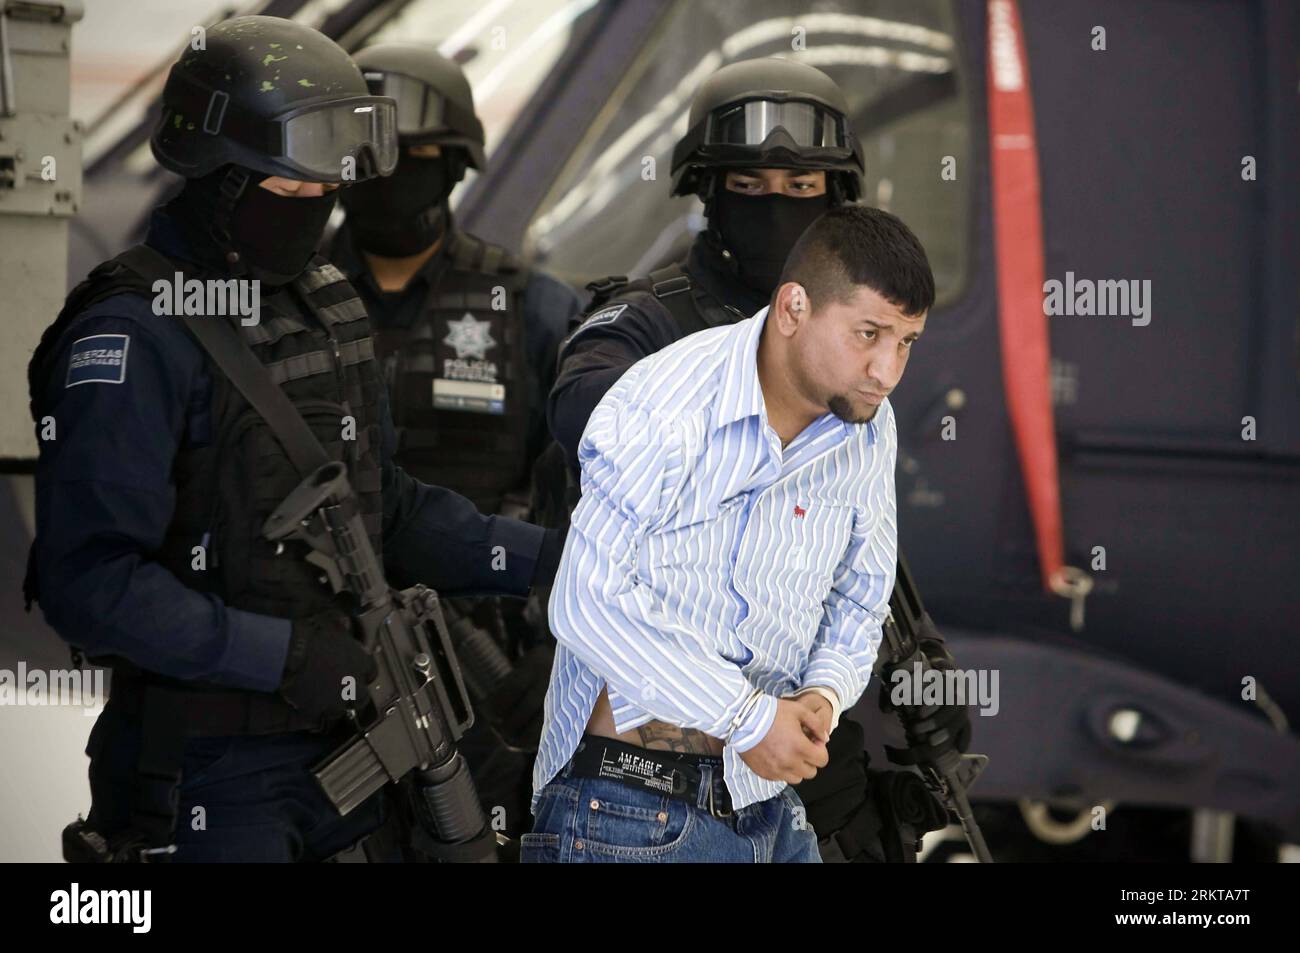 Bildnummer: 58419040  Datum: 02.09.2012  Copyright: imago/Xinhua (120902) -- MEXICO CITY, Sept. 2012 (Xinhua) -- David Rosales Guzman (R), also known as Commander Devil , is escorted by Mexican Federal Police agents during a press conference in Mexico City, capital of Mexico, on Sept. 2, 2012. As the leader of criminal organization Cartel del Golfo in Monterrey, Guzman was arrested for suspected multiple murders, extortions, kidnappings and armed attacks in public areas, according to the Secretary of State for Public Security. (Xinhua/Rodrigo Oropeza) MEXICO-DRUGS-SUSPECT PUBLICATIONxNOTxINxCH Stock Photo